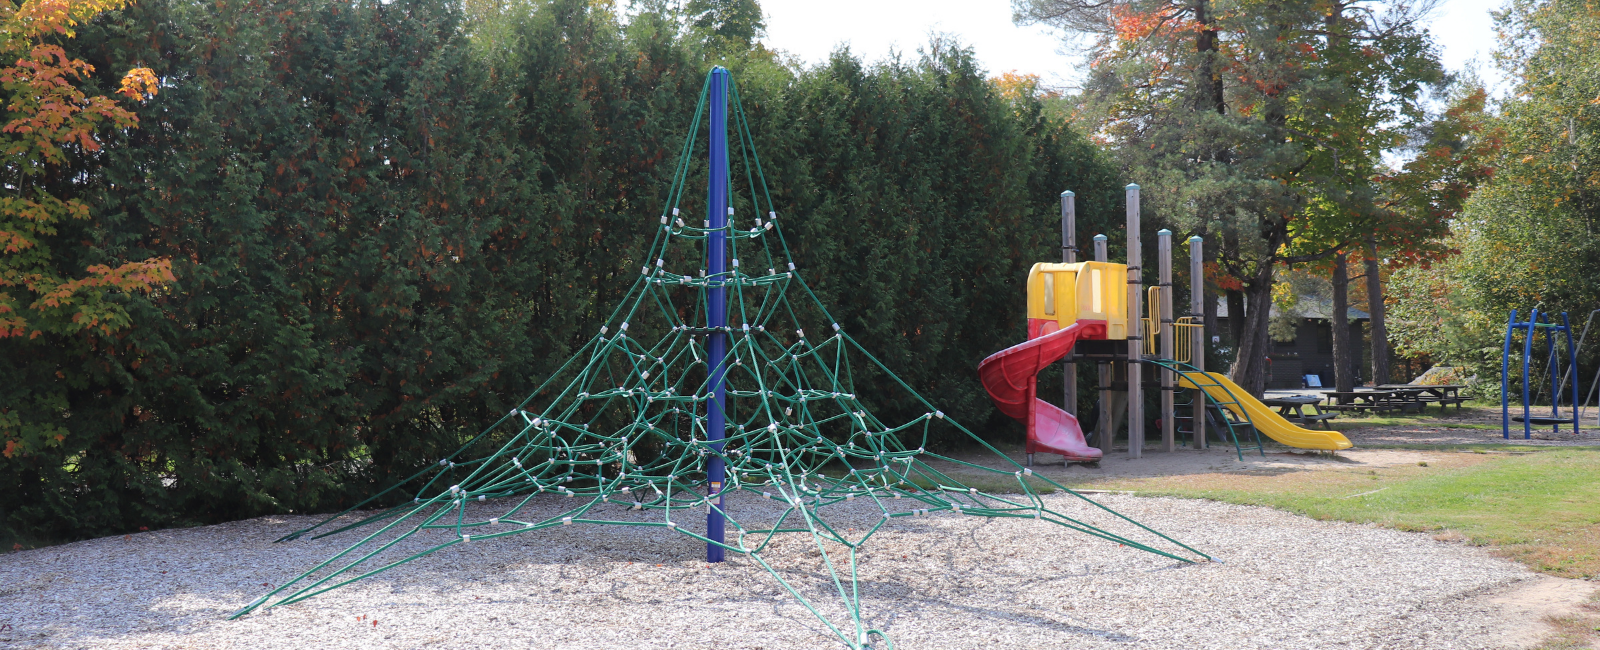 West Guilford playground equipment